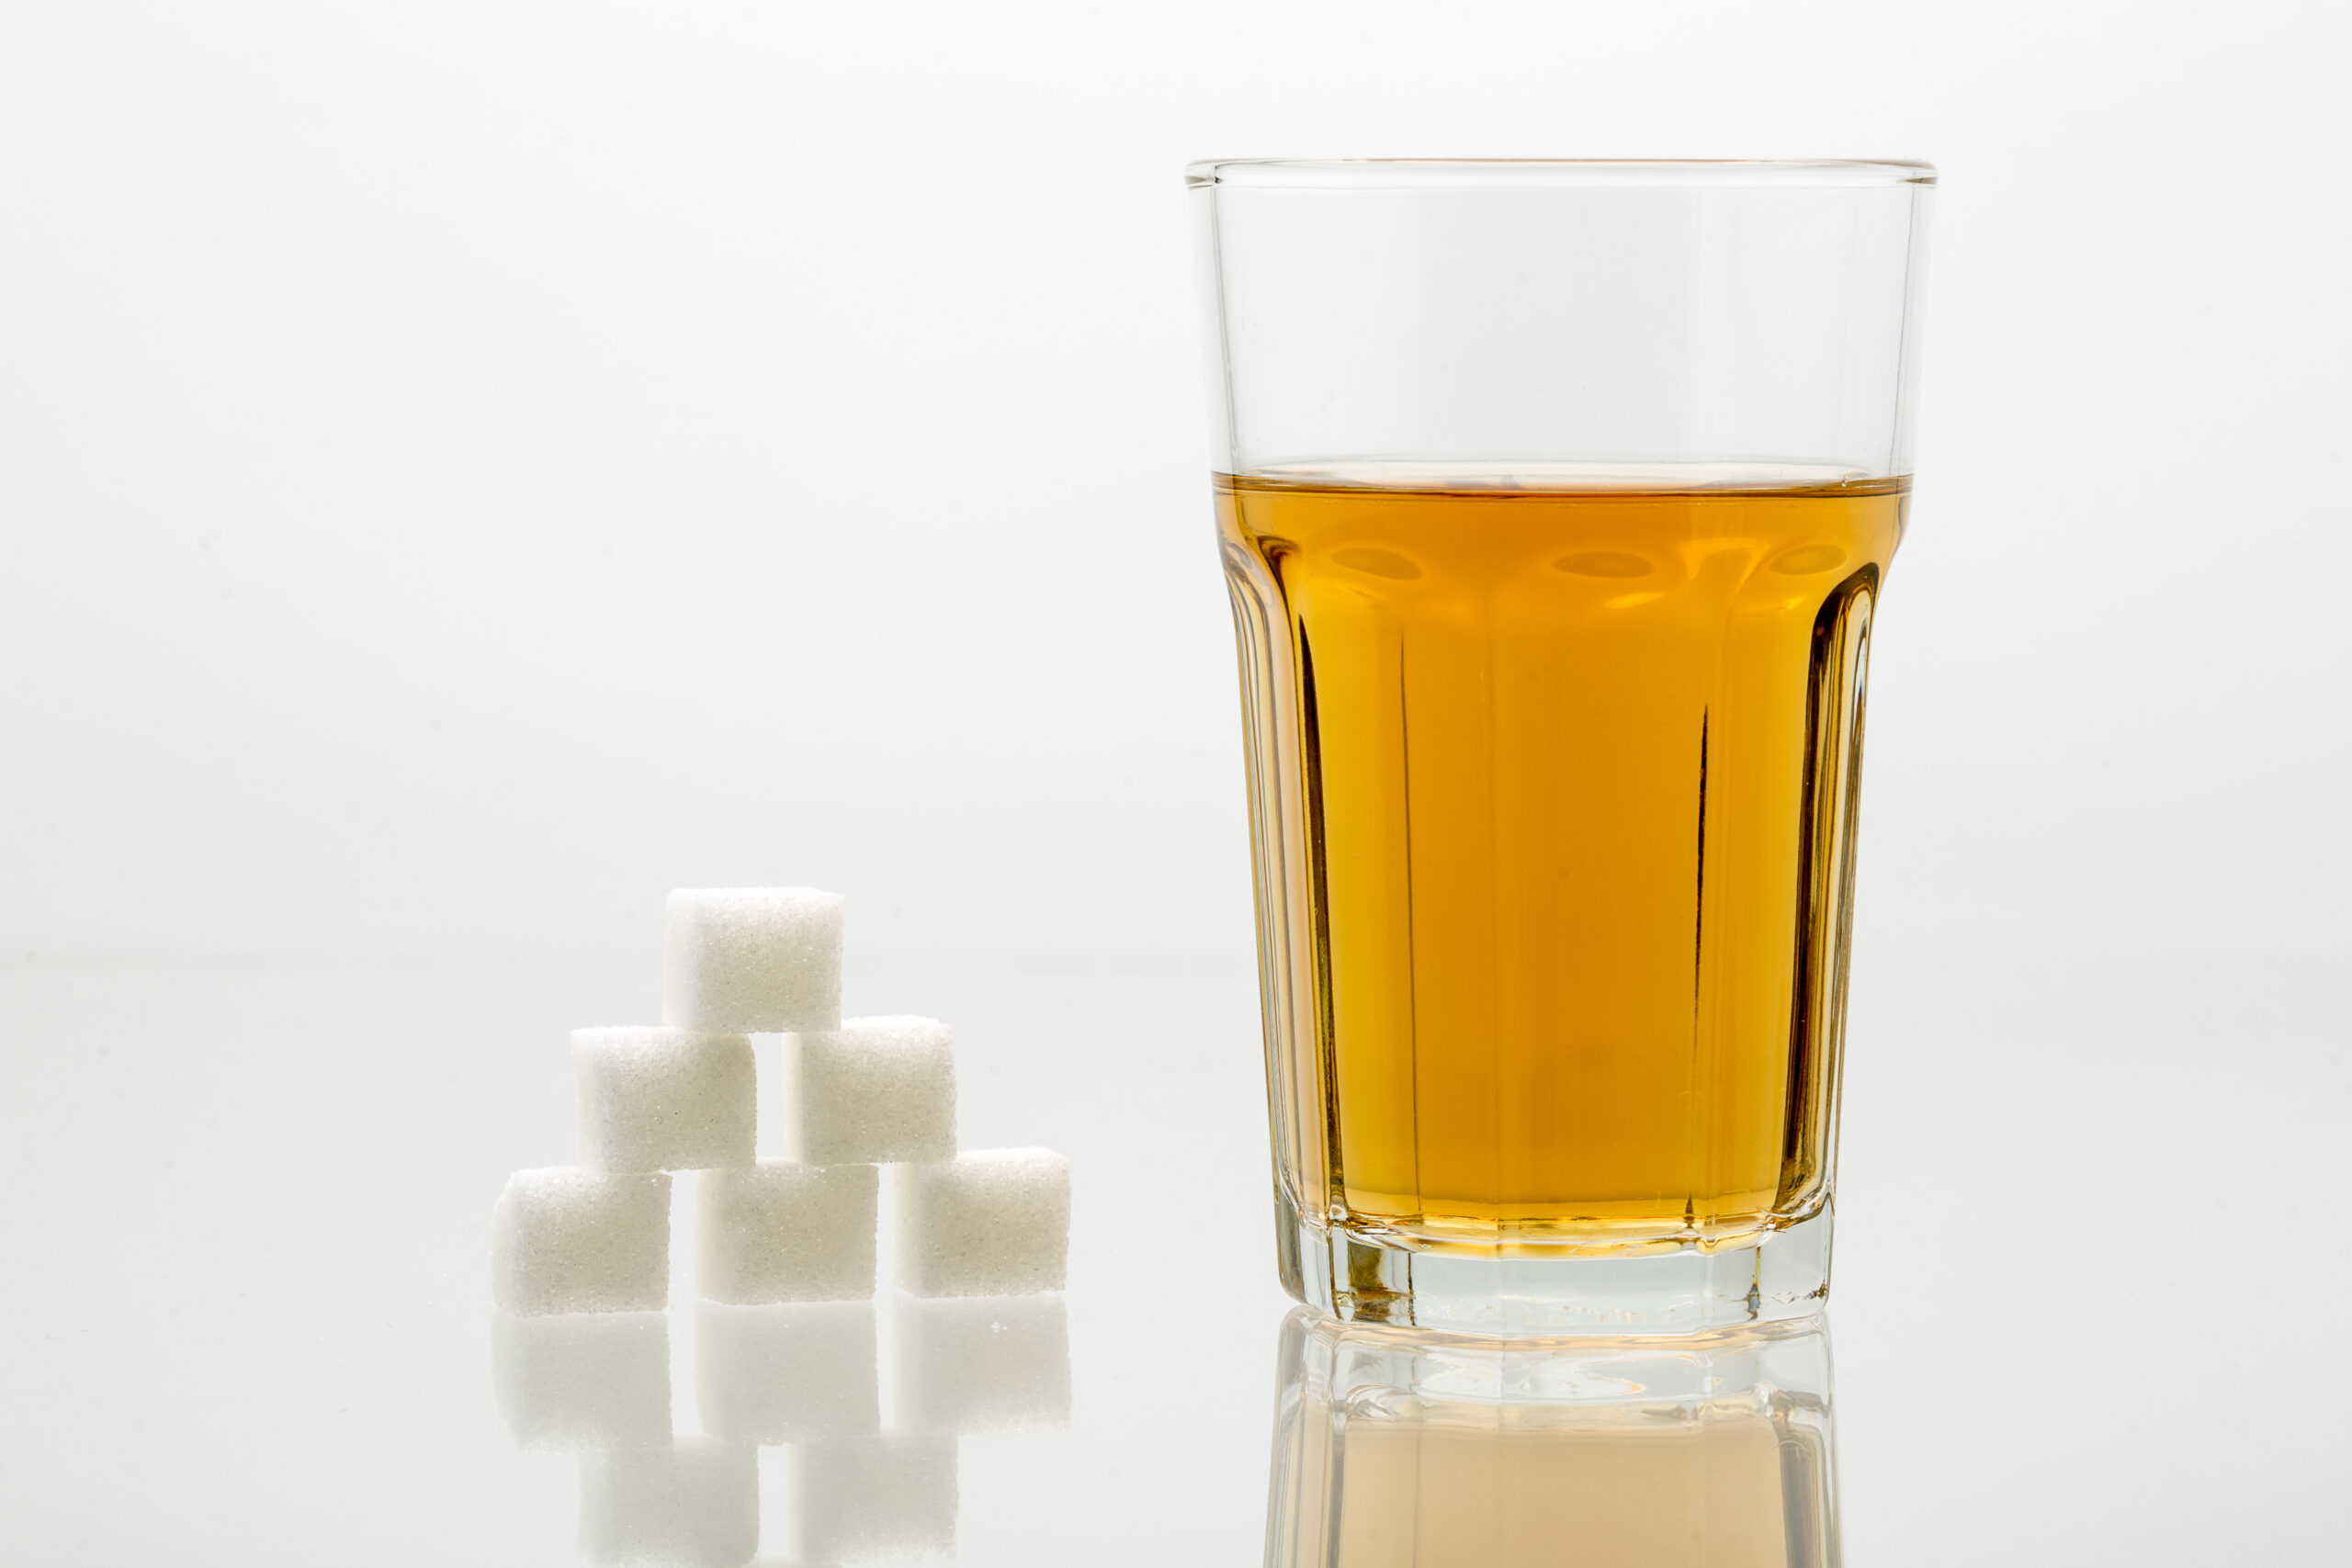 Tumor Growth May Be Directly Fueled By High Fructose Corn Syrup